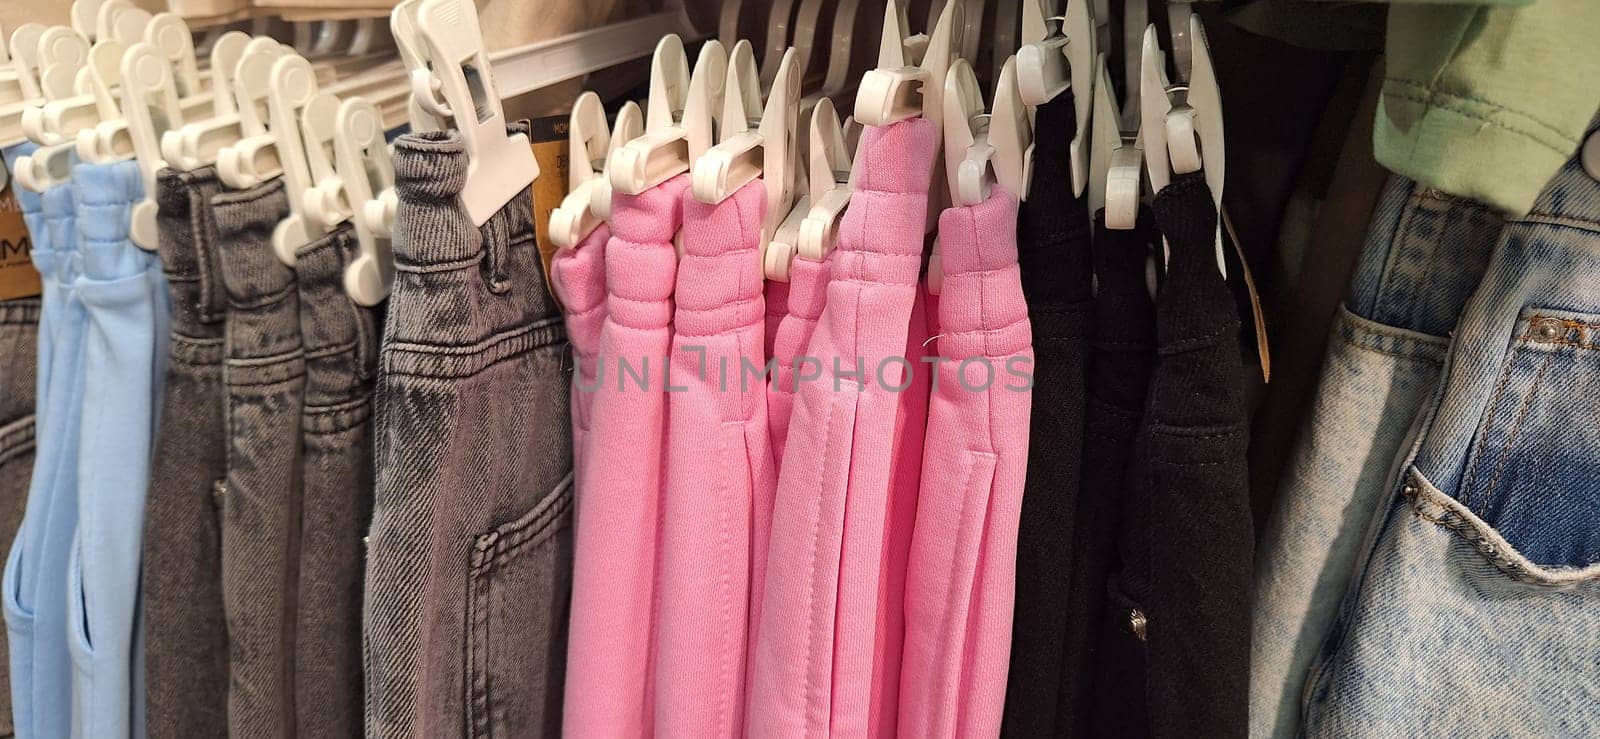 Different colored pants neatly hung on hooks in a rack. Variety of styles and sizes displayed in an organized manner.